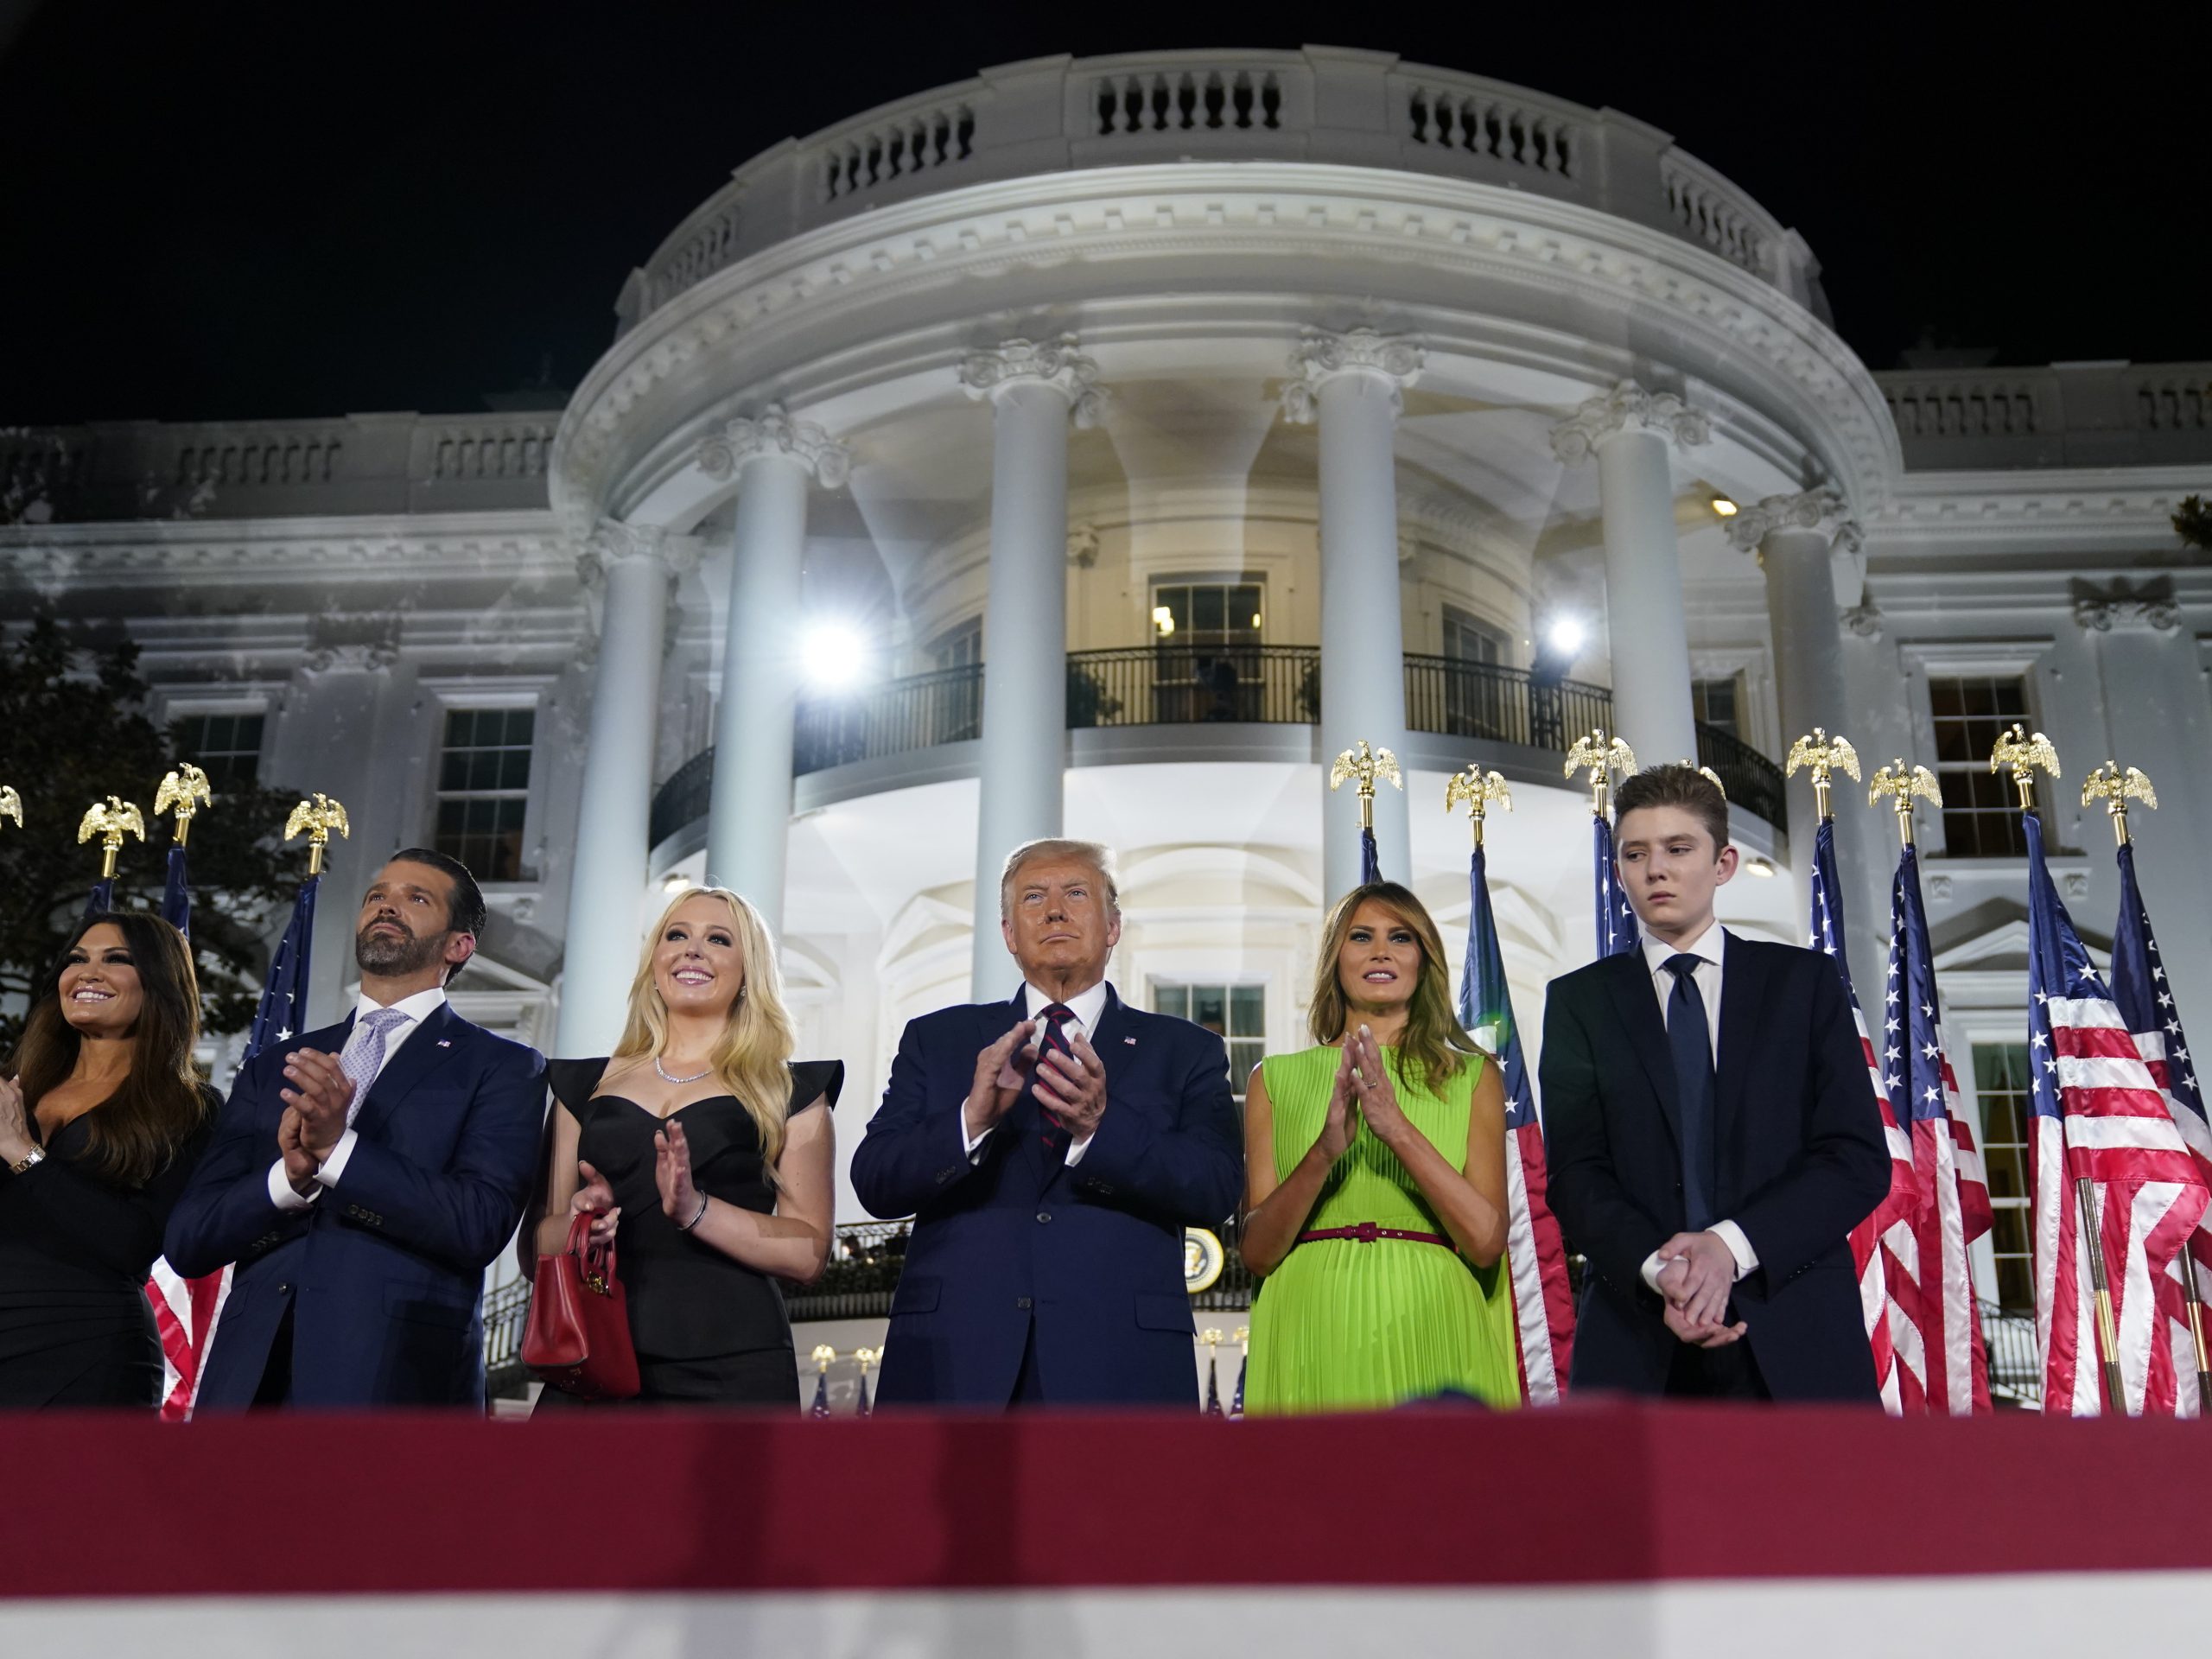 From left, Kimberly Guilfoyle, Donald Trump Jr., Tiffany Trump, President Trump, first lady Melania Trump and Barron Trump stand on the South Lawn of the White House on the last night of the Republican National Convention.